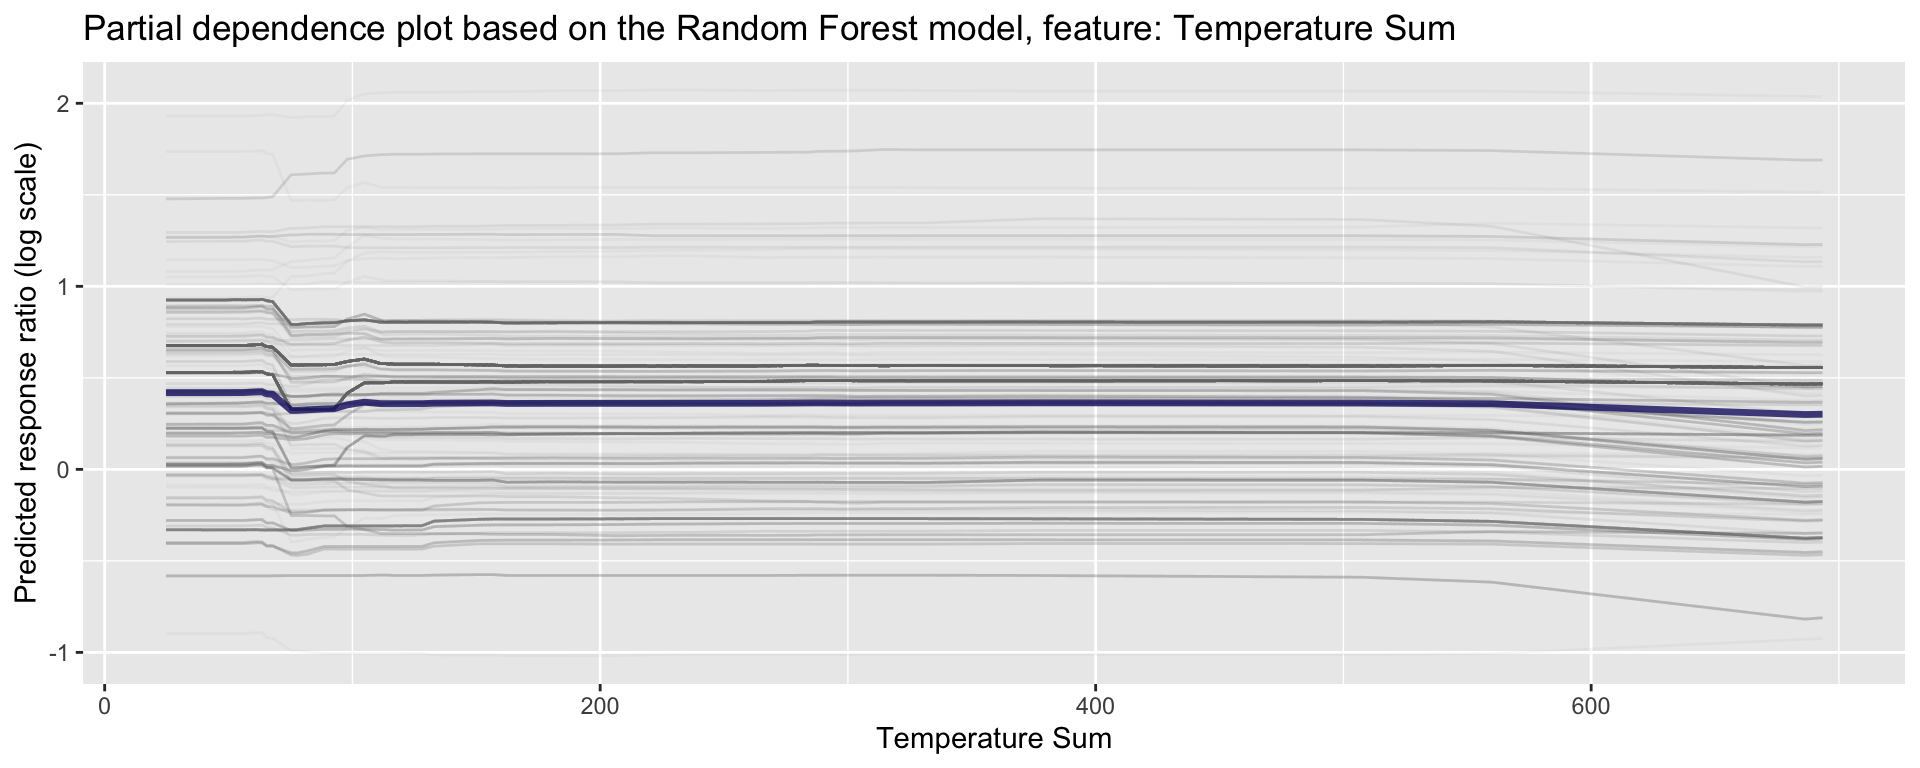 Partial dependence plot for Temperature Sumr